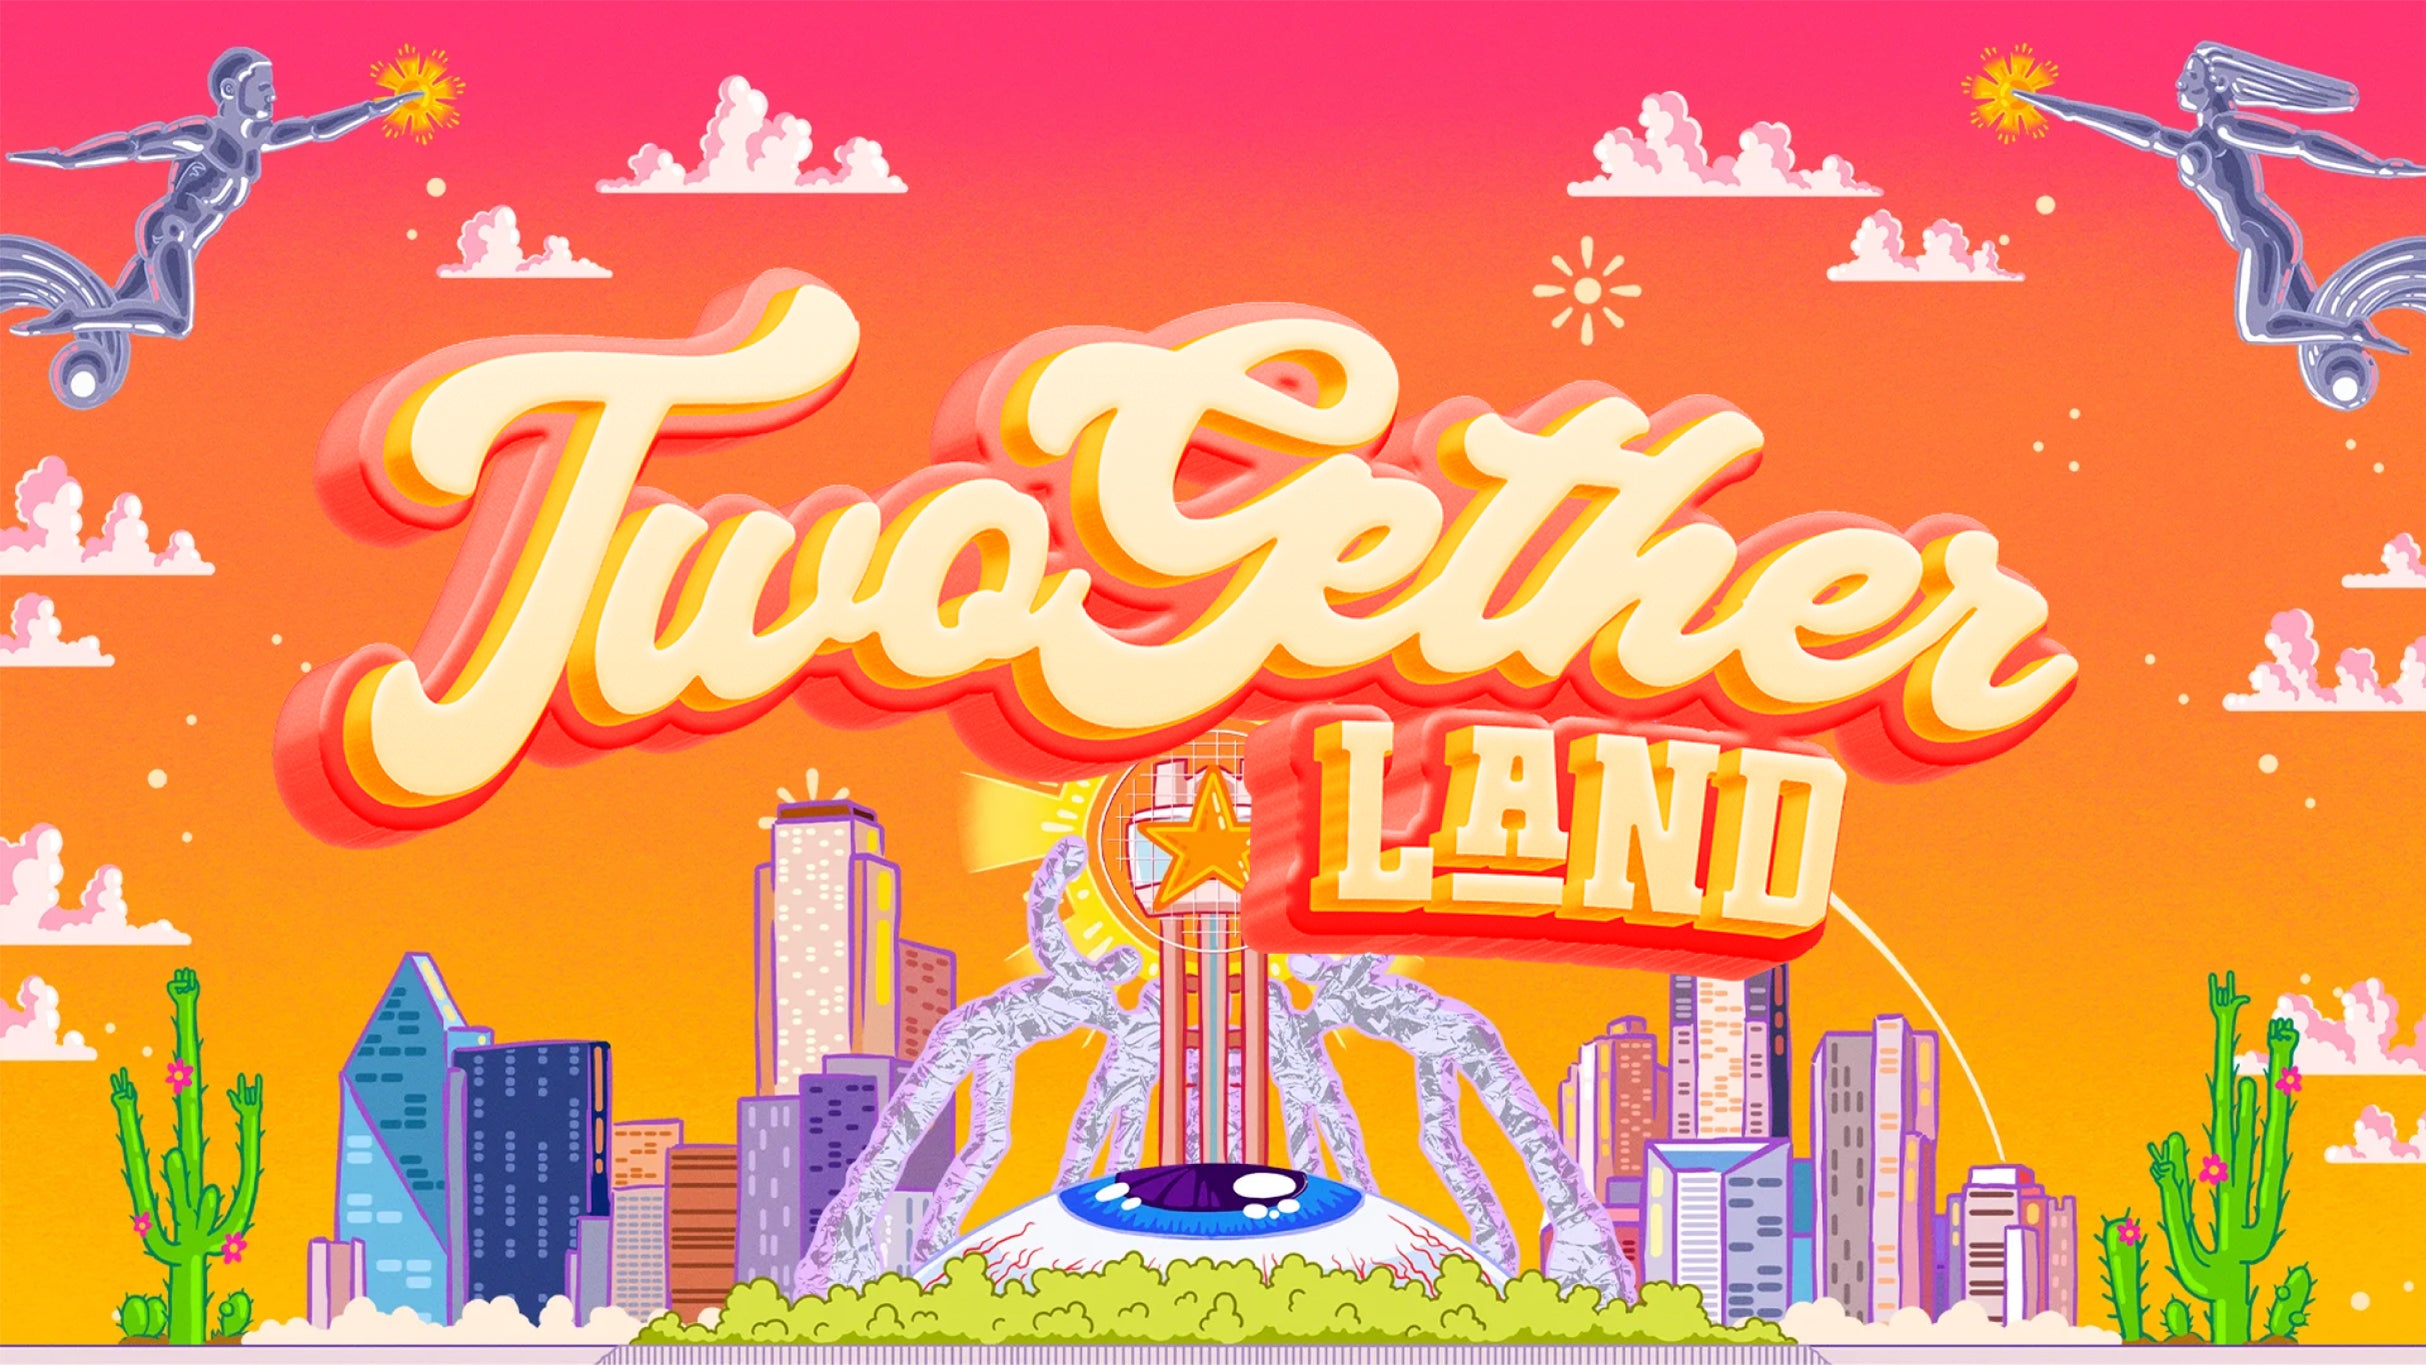 TwoGether Land at Fair Park - Dallas